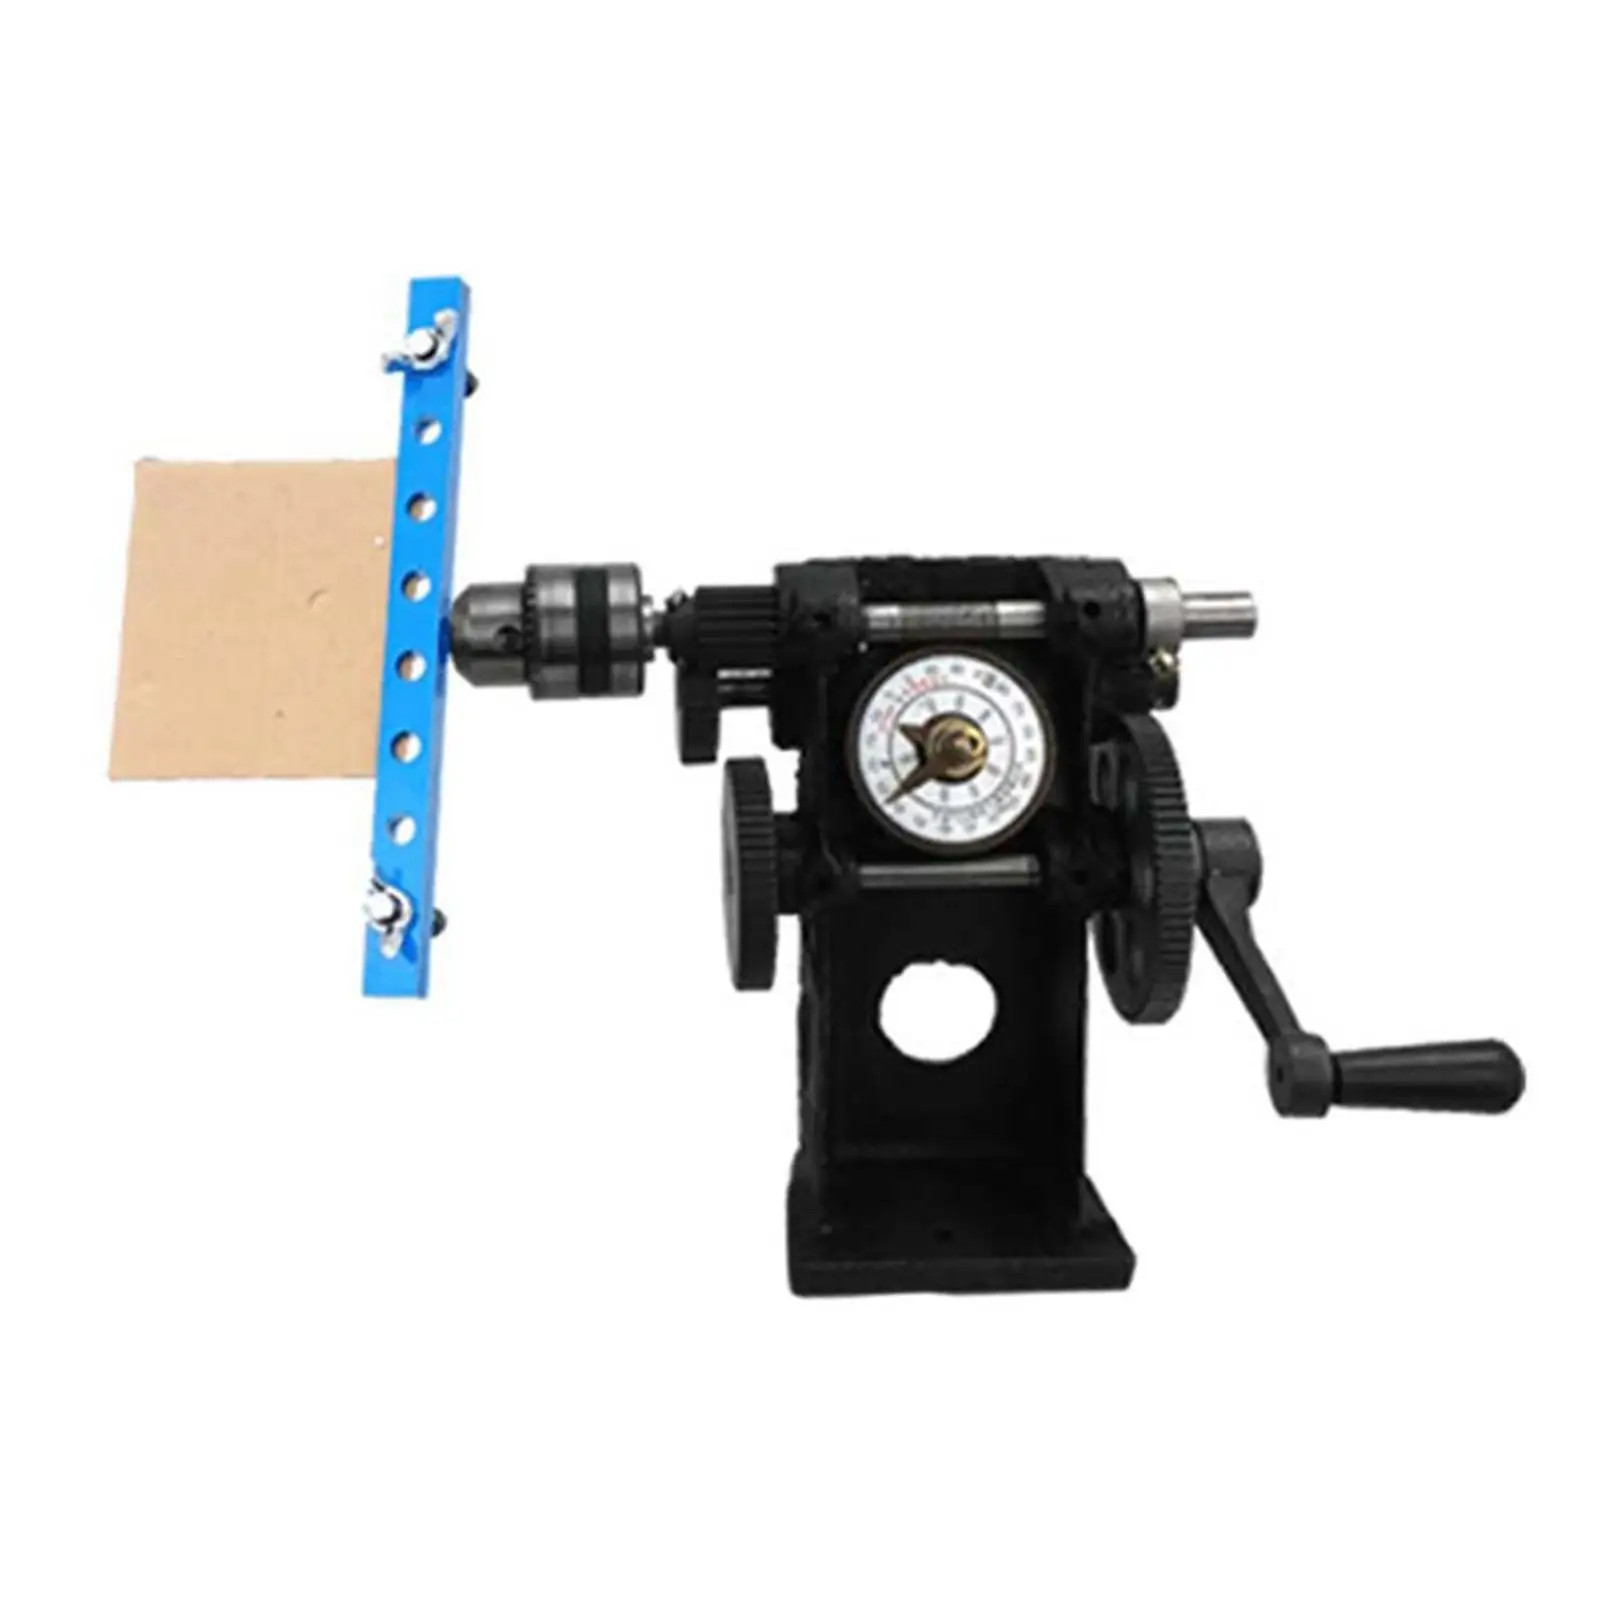 Manual Paper Winding Machine Manually Winding Machine Easy to Use Paper Sheet Winding Convenient for DIY Cards Crafts